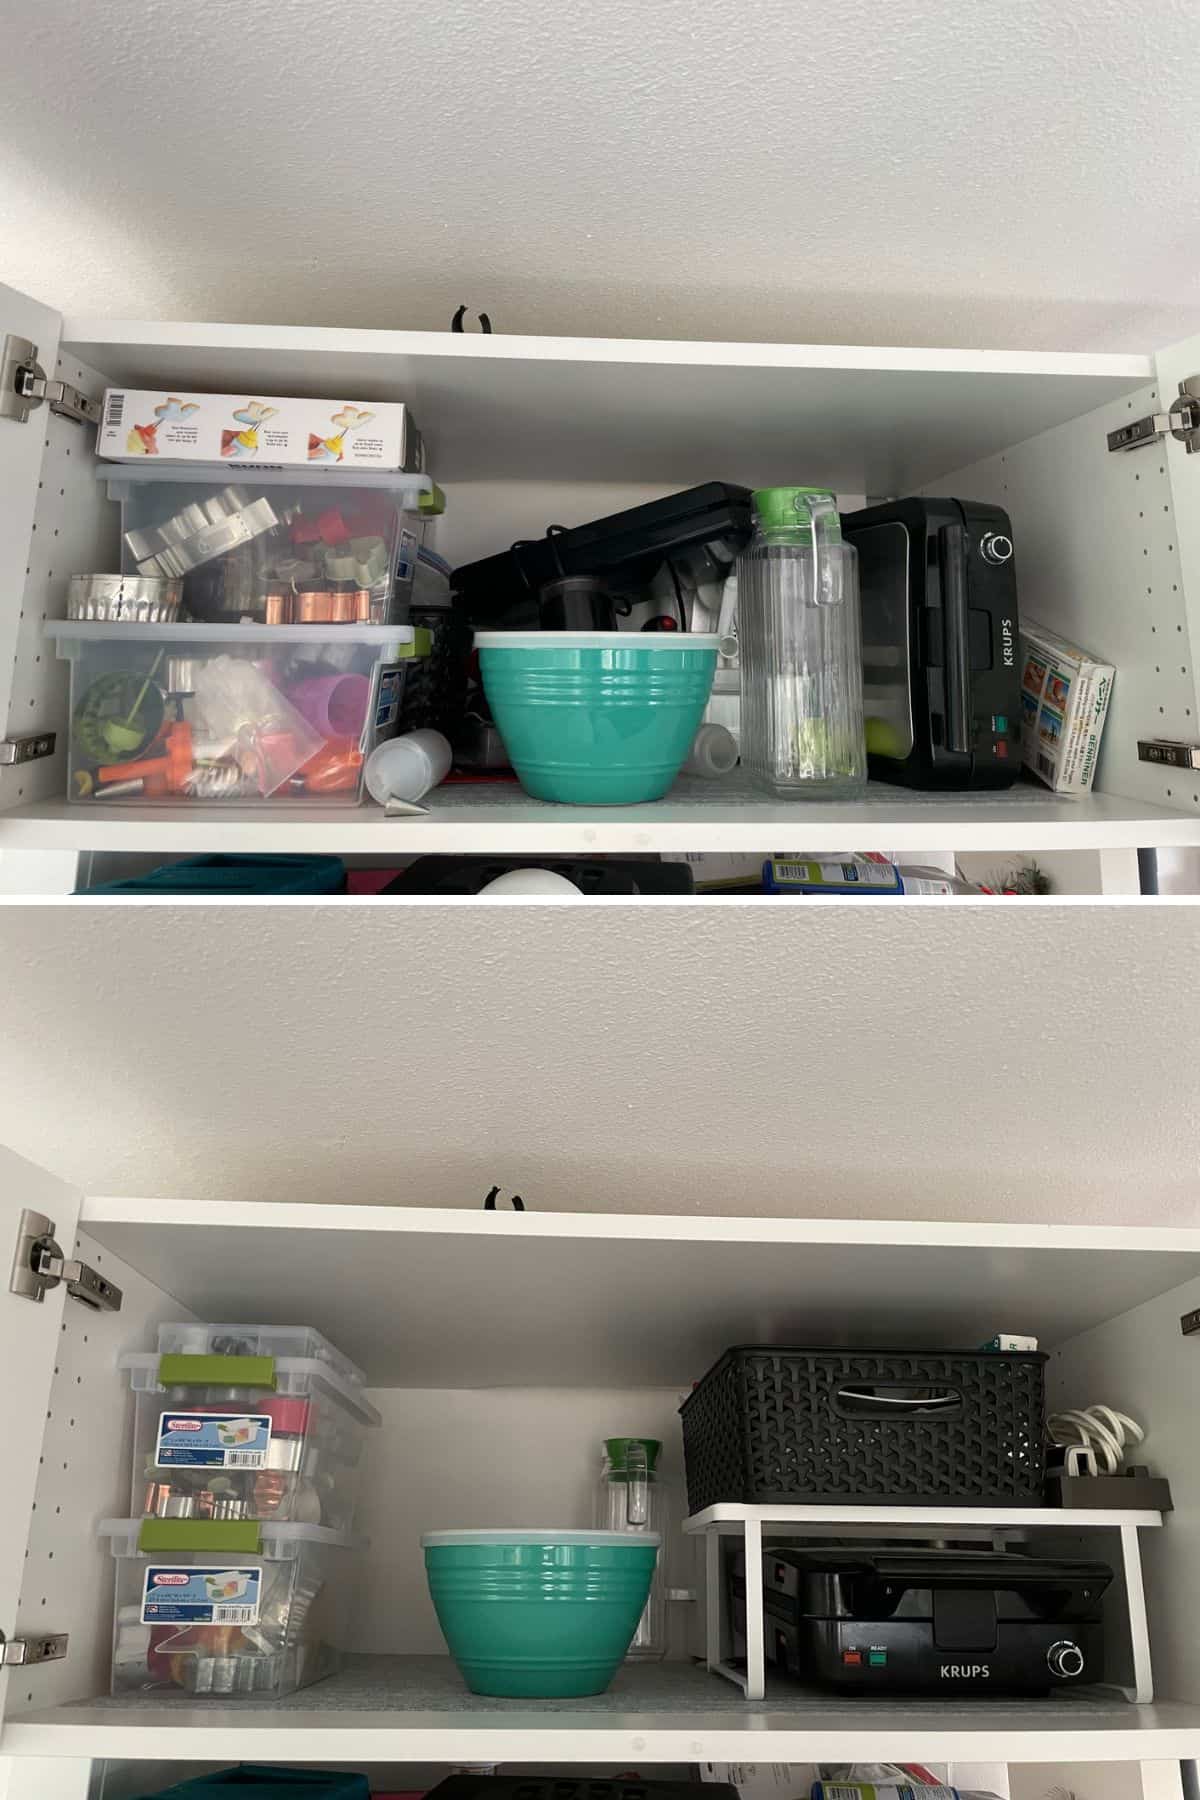 2 photos of a cabinet. One unorganized, the other organized.